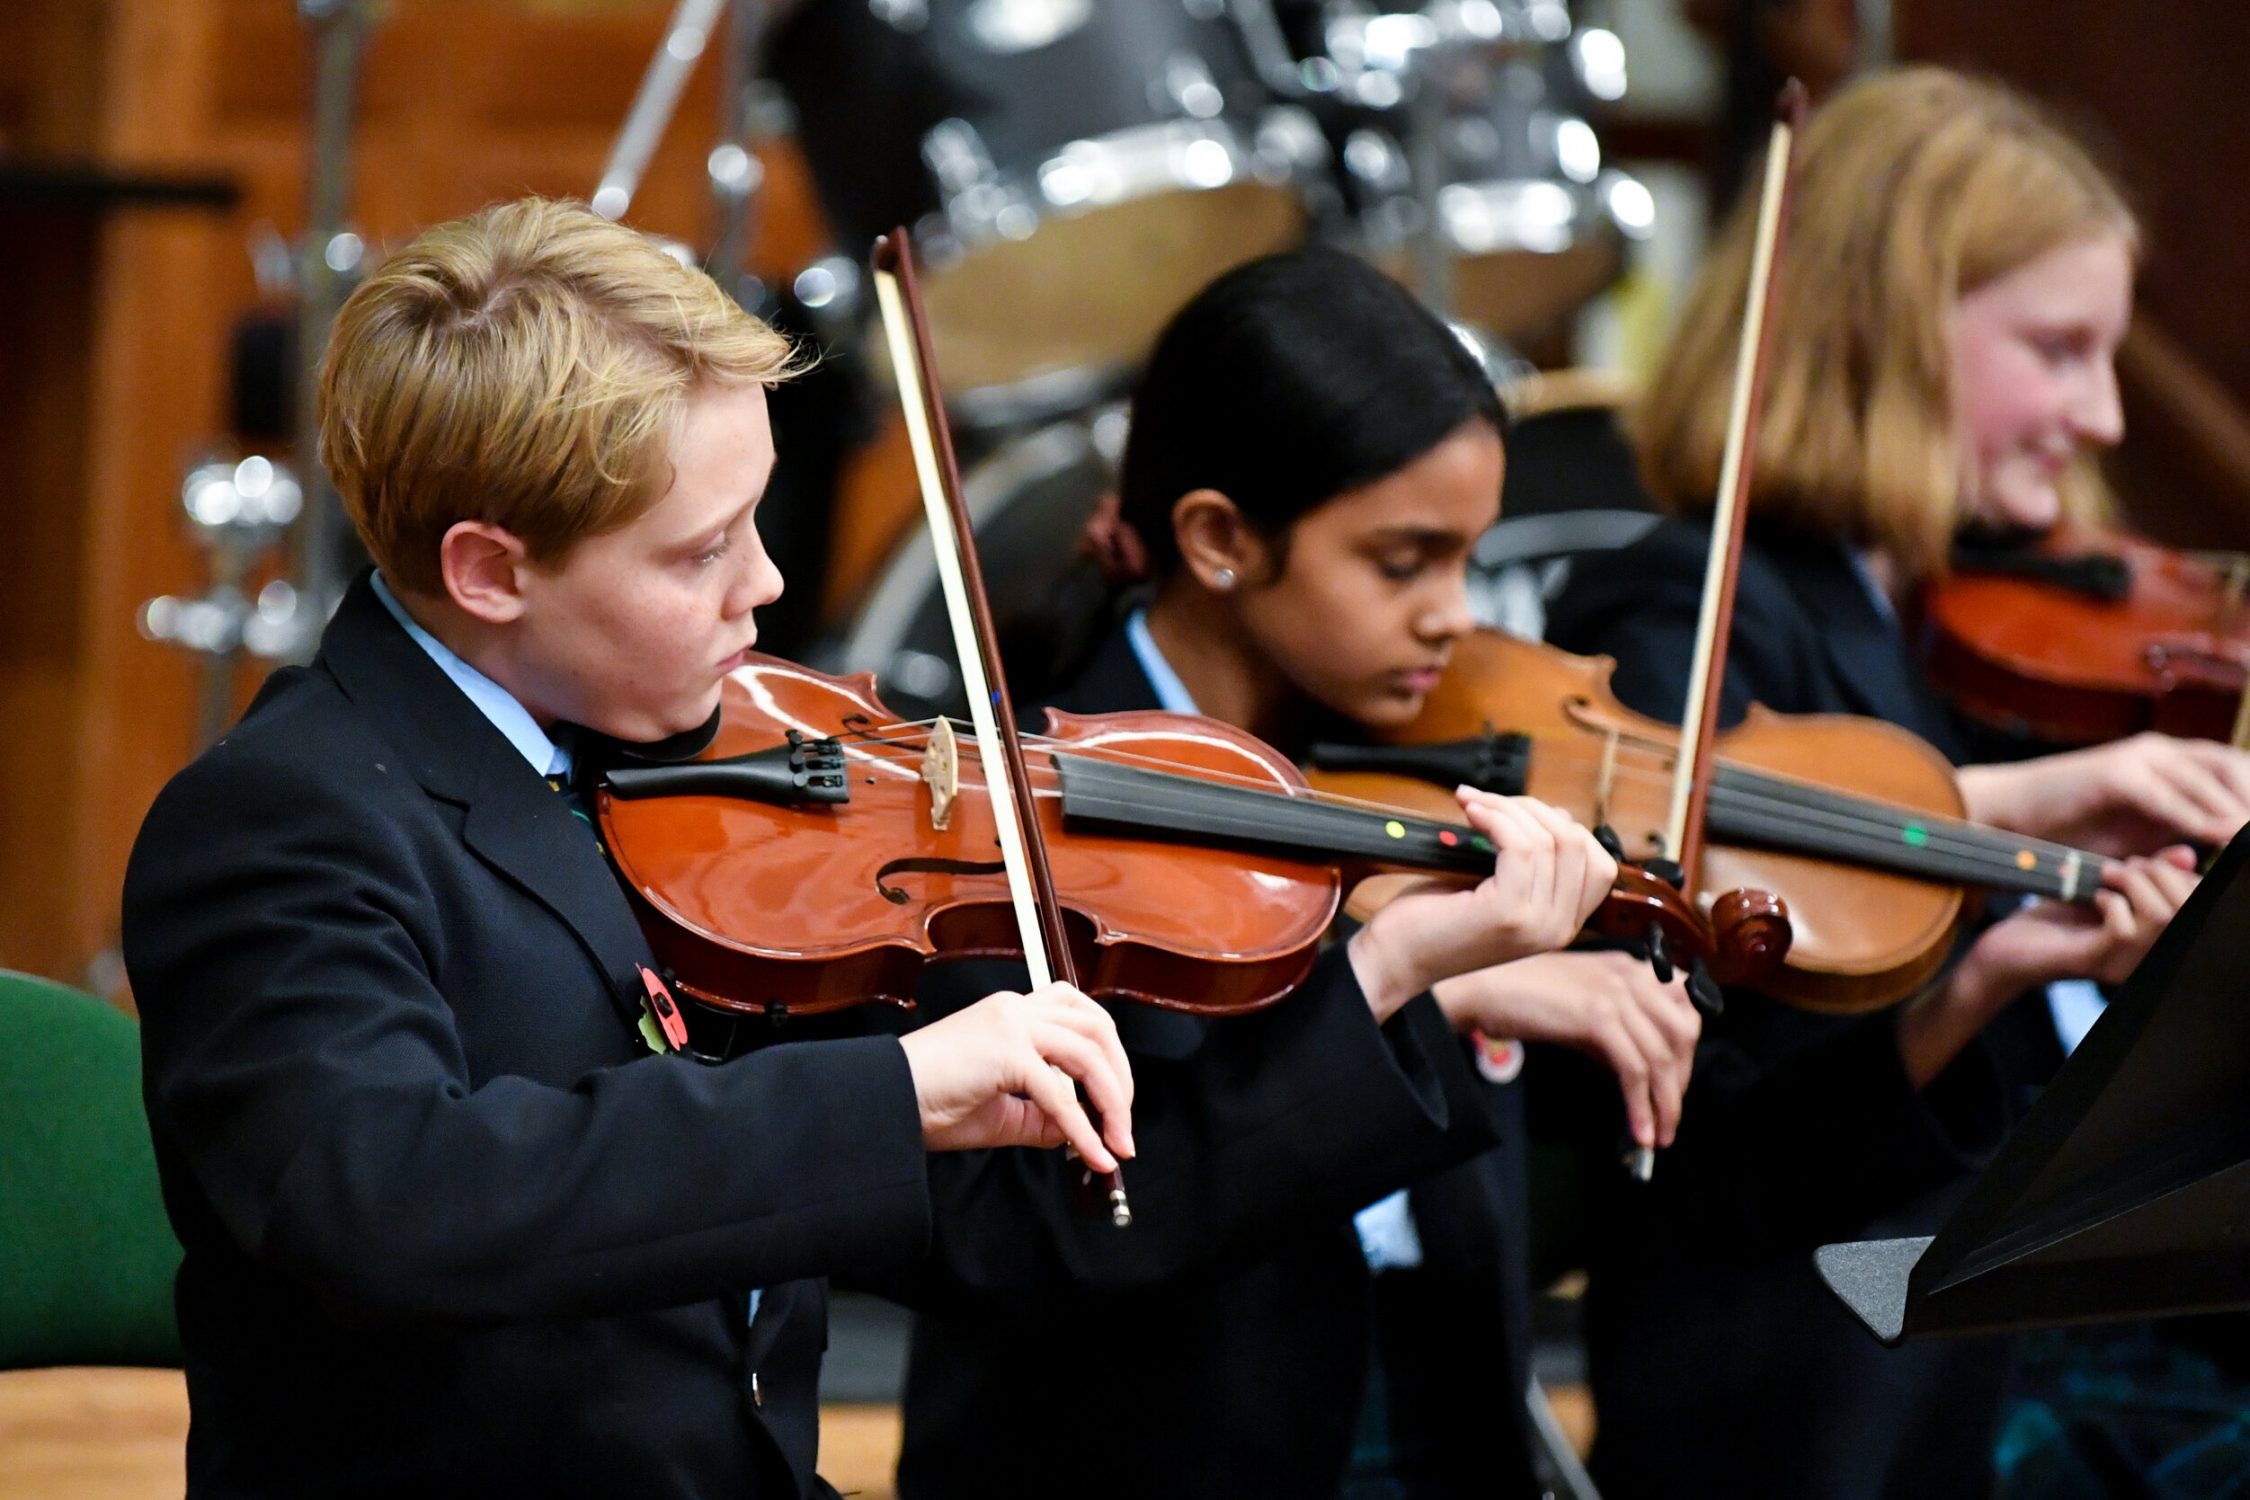 A week of Music Concerts at RGS